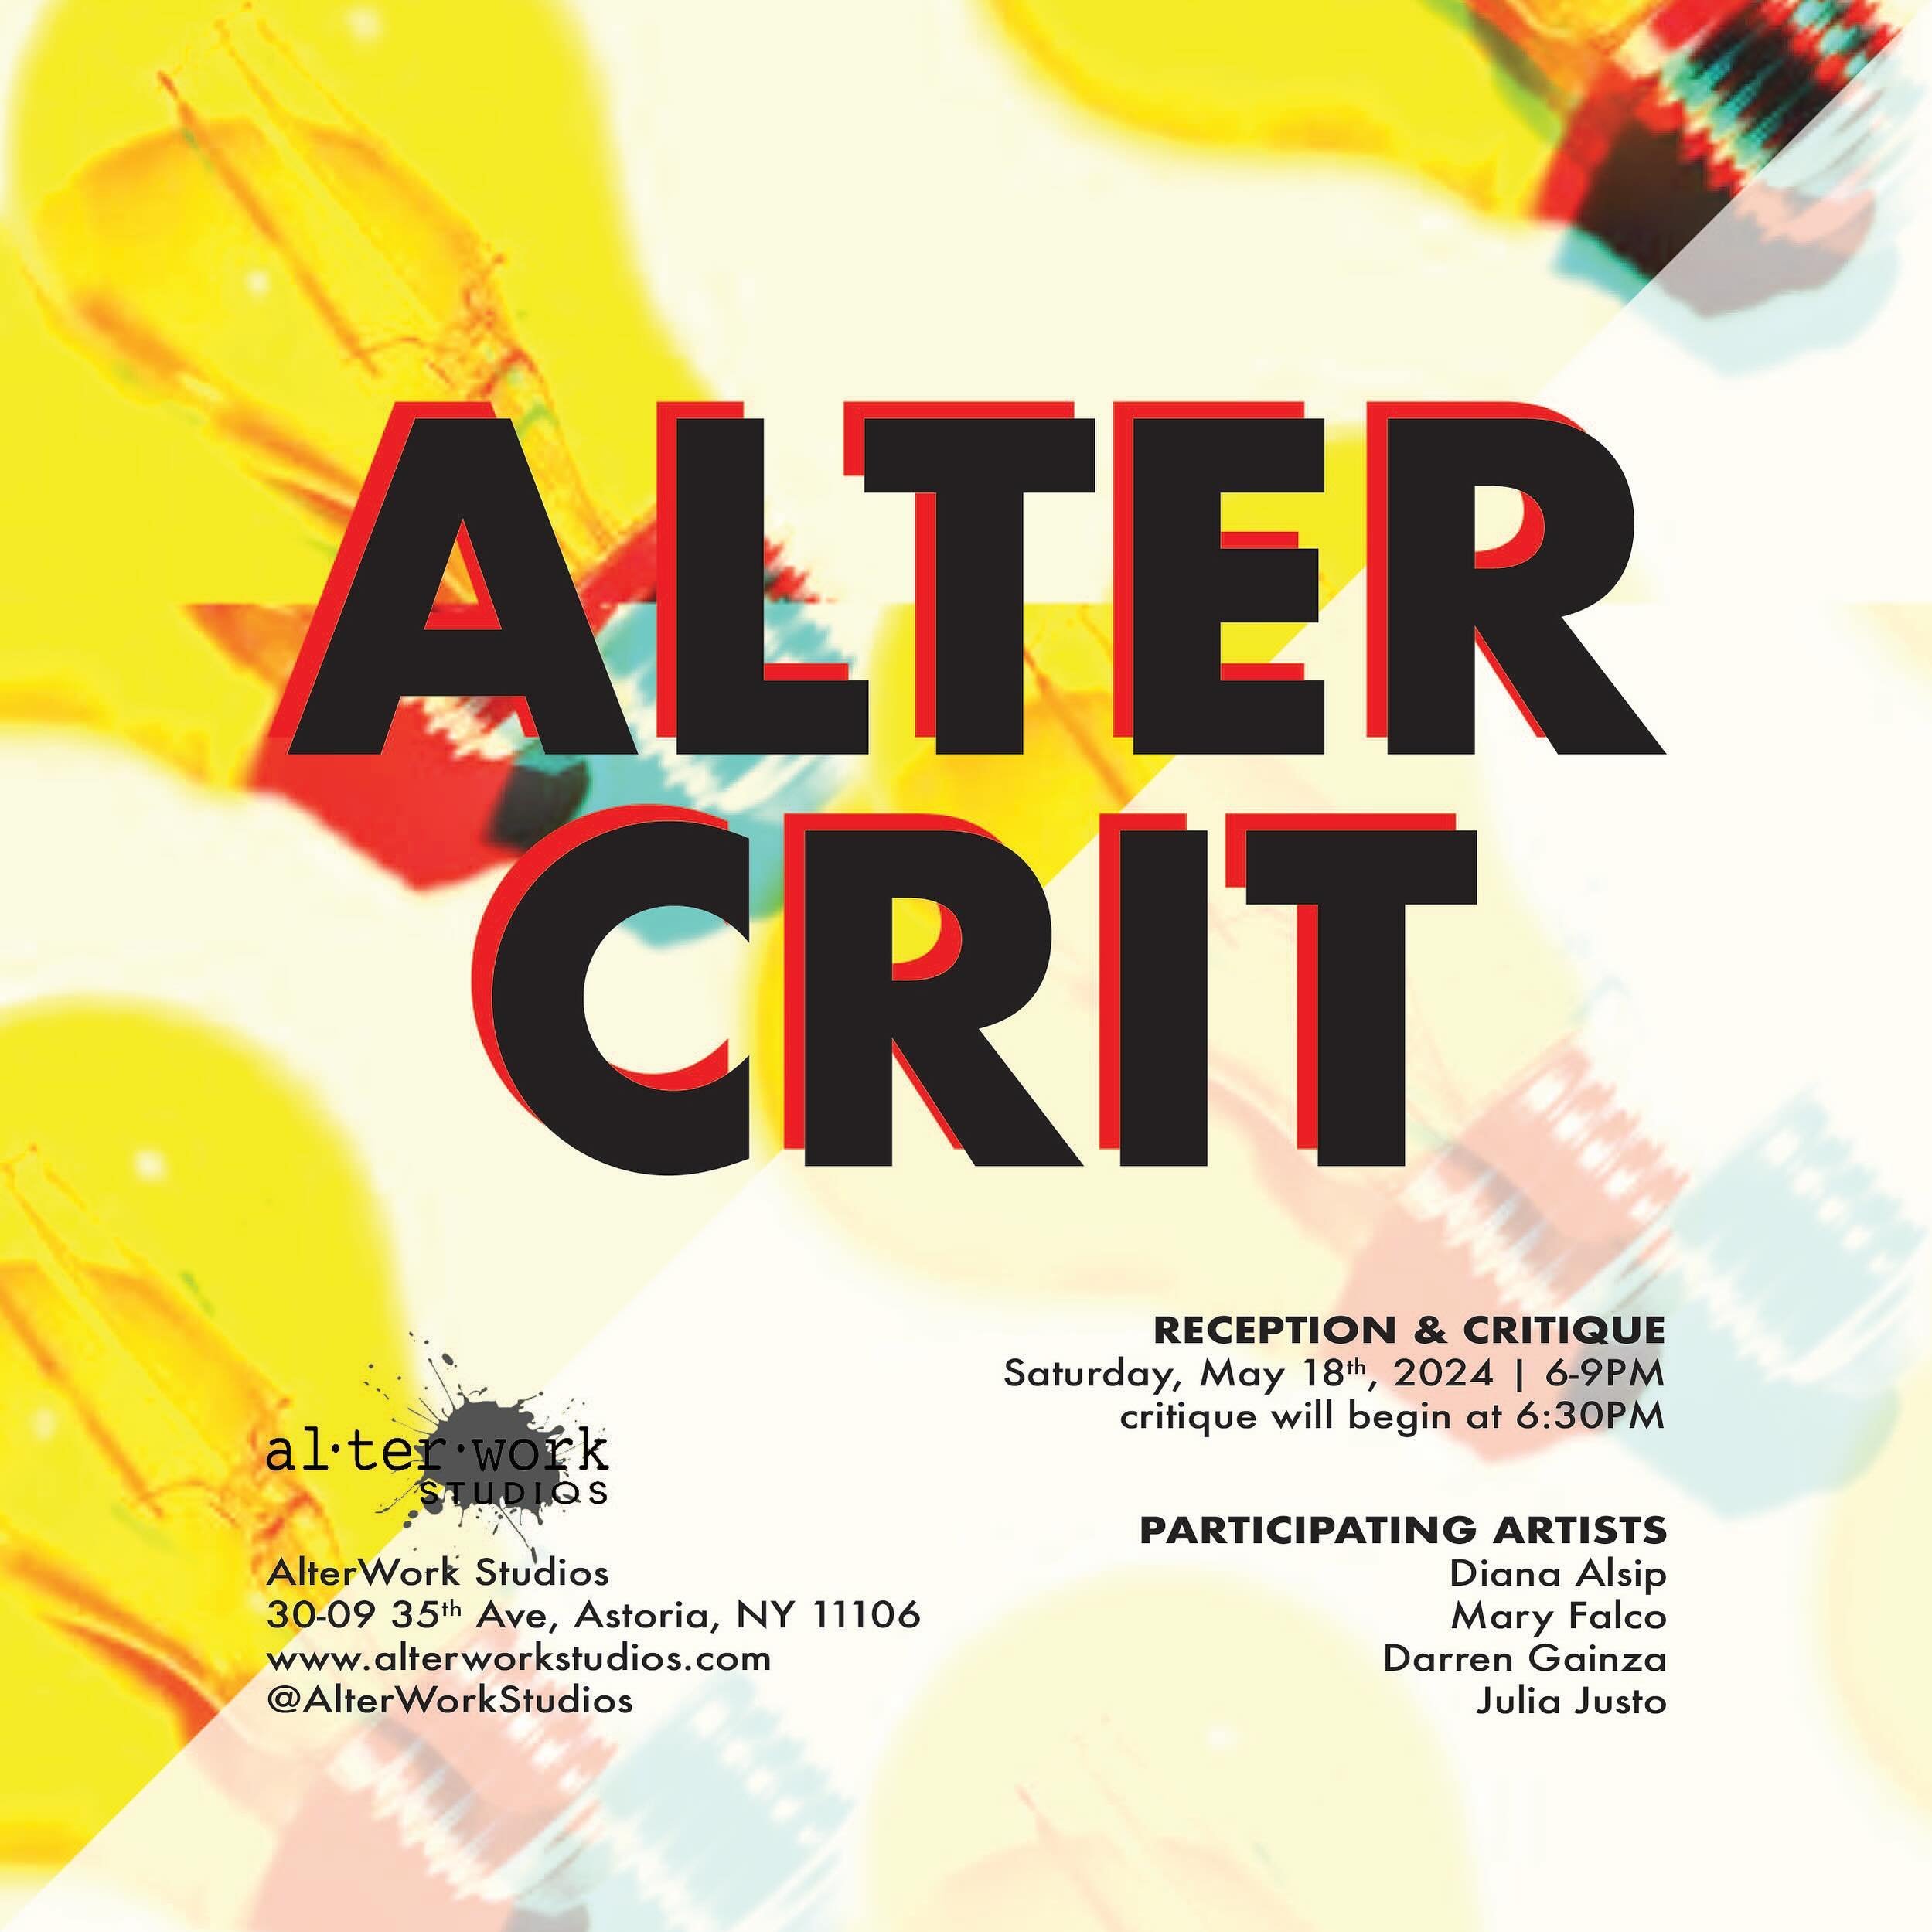 Join us this Saturday 5/18 for AlterCrit 2024! Four local artists will be showing their work and seeking feedback from our #AlterWorkStudios community. 6-9PM! 

Participating artists:
DIANA ALSIP
MARY L FALCO 
DARREN GAINZA 
JULIA JUSTO

#altercrit #